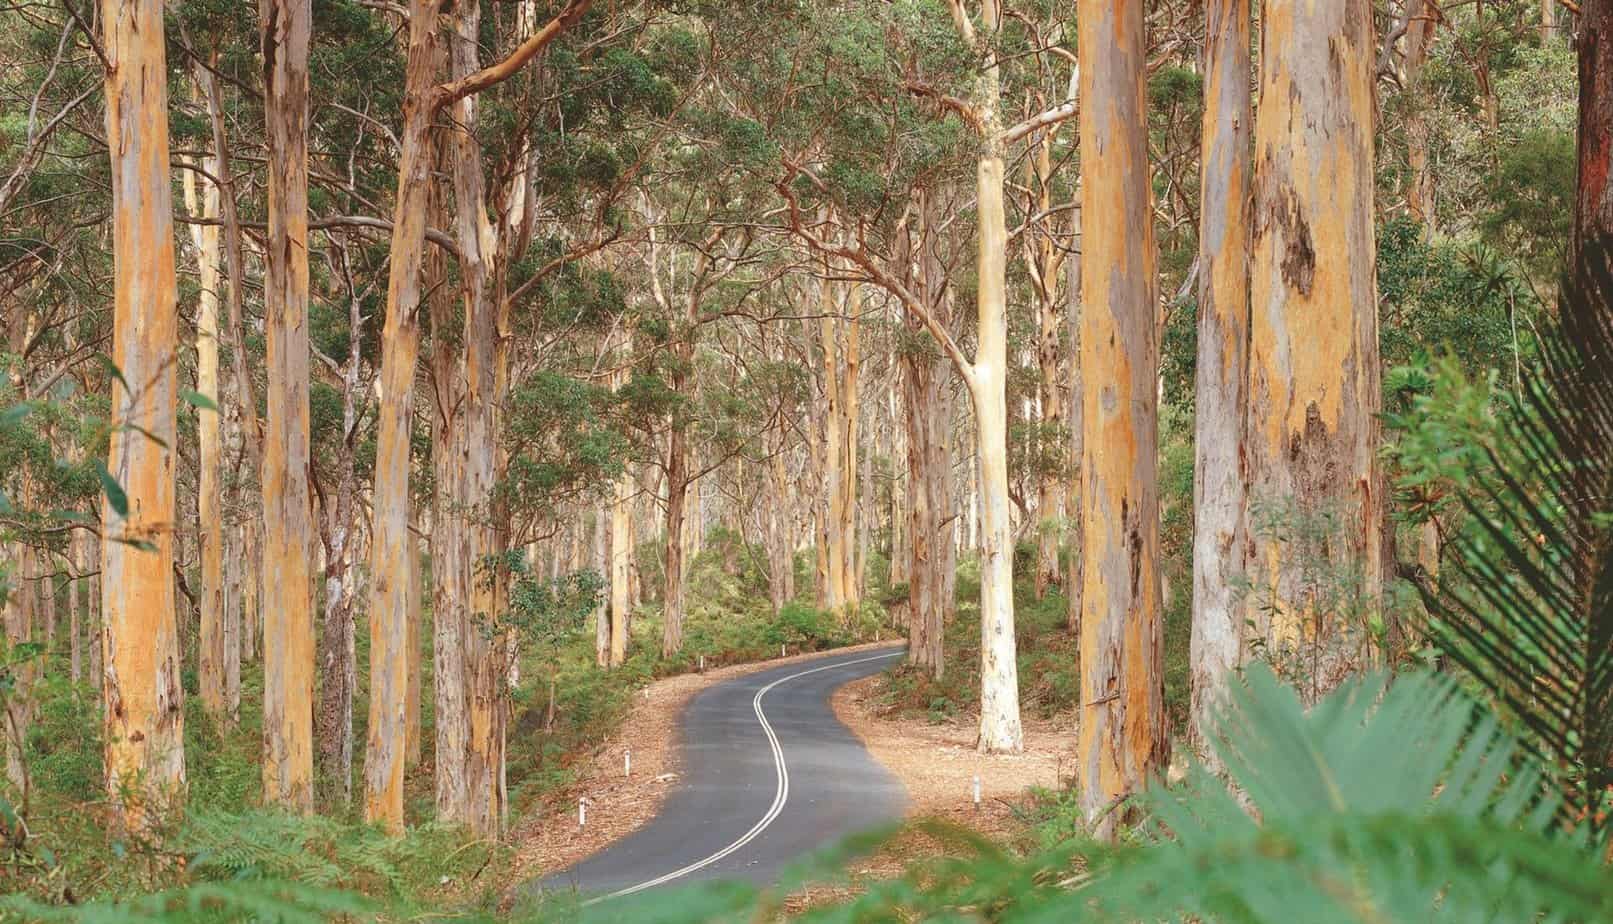 Winding road meandering through the tall karri trees of Boranup Forest, showcasing the natural beauty of Western Australia.